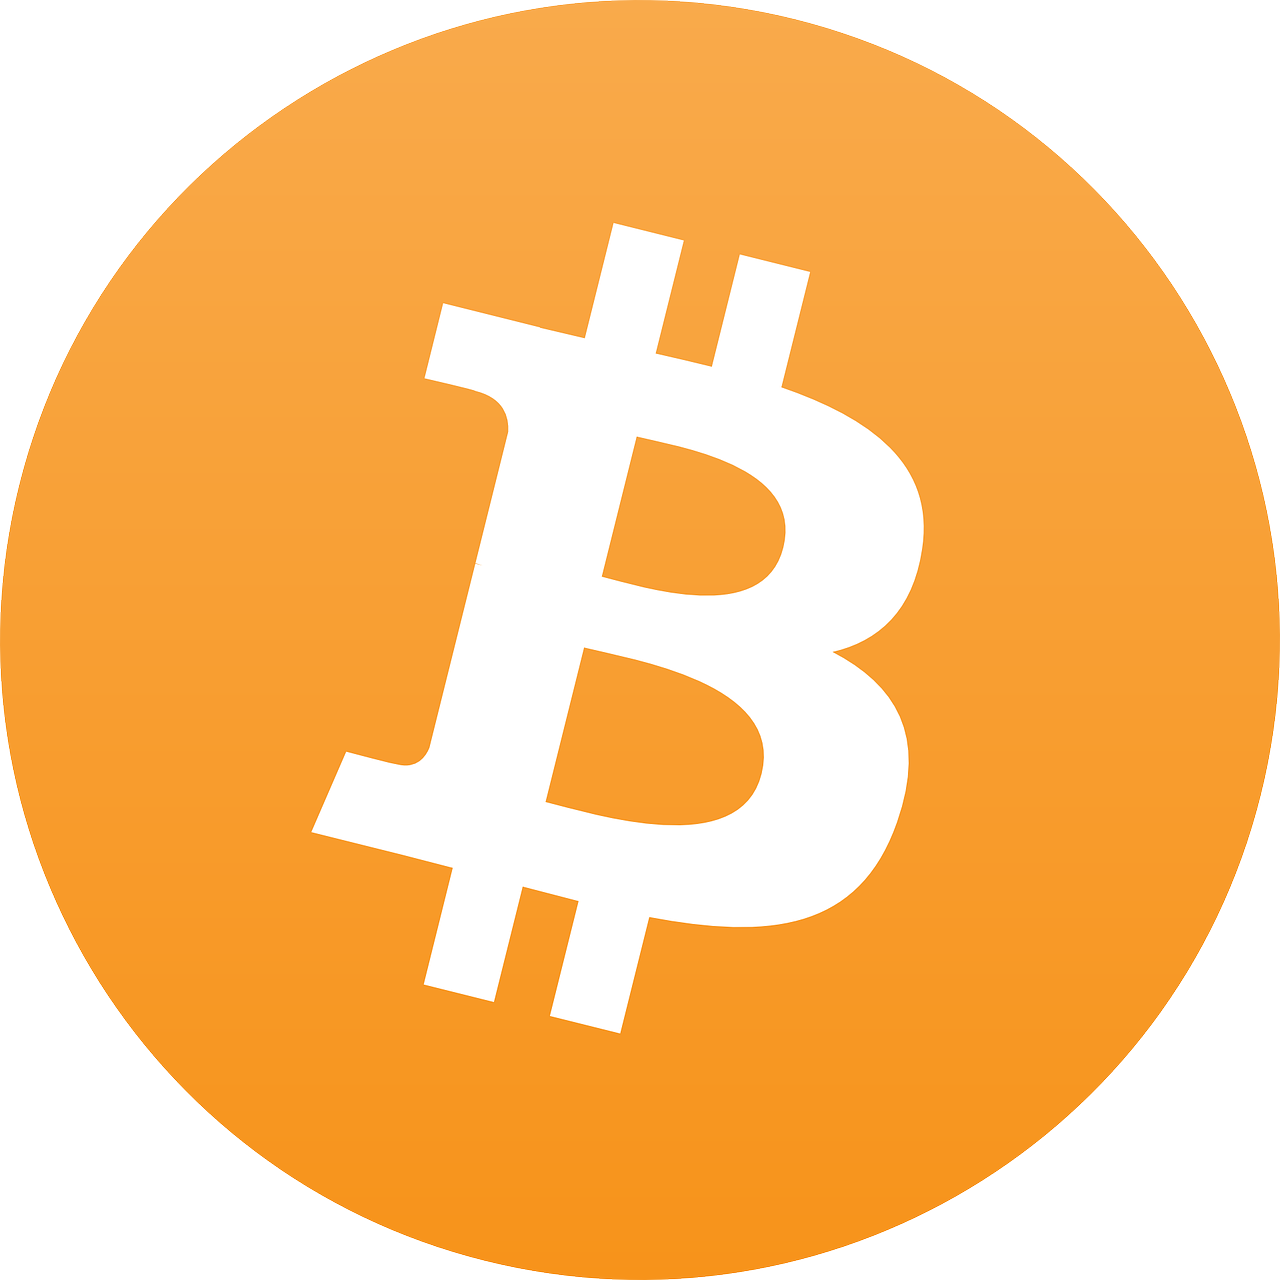 a bit bit bit bit bit bit bit bit bit bit bit bit bit bit bit bit bit, a digital rendering, by David Budd, pixabay, bitcoin, isolated on white background, vector icon, no gradients